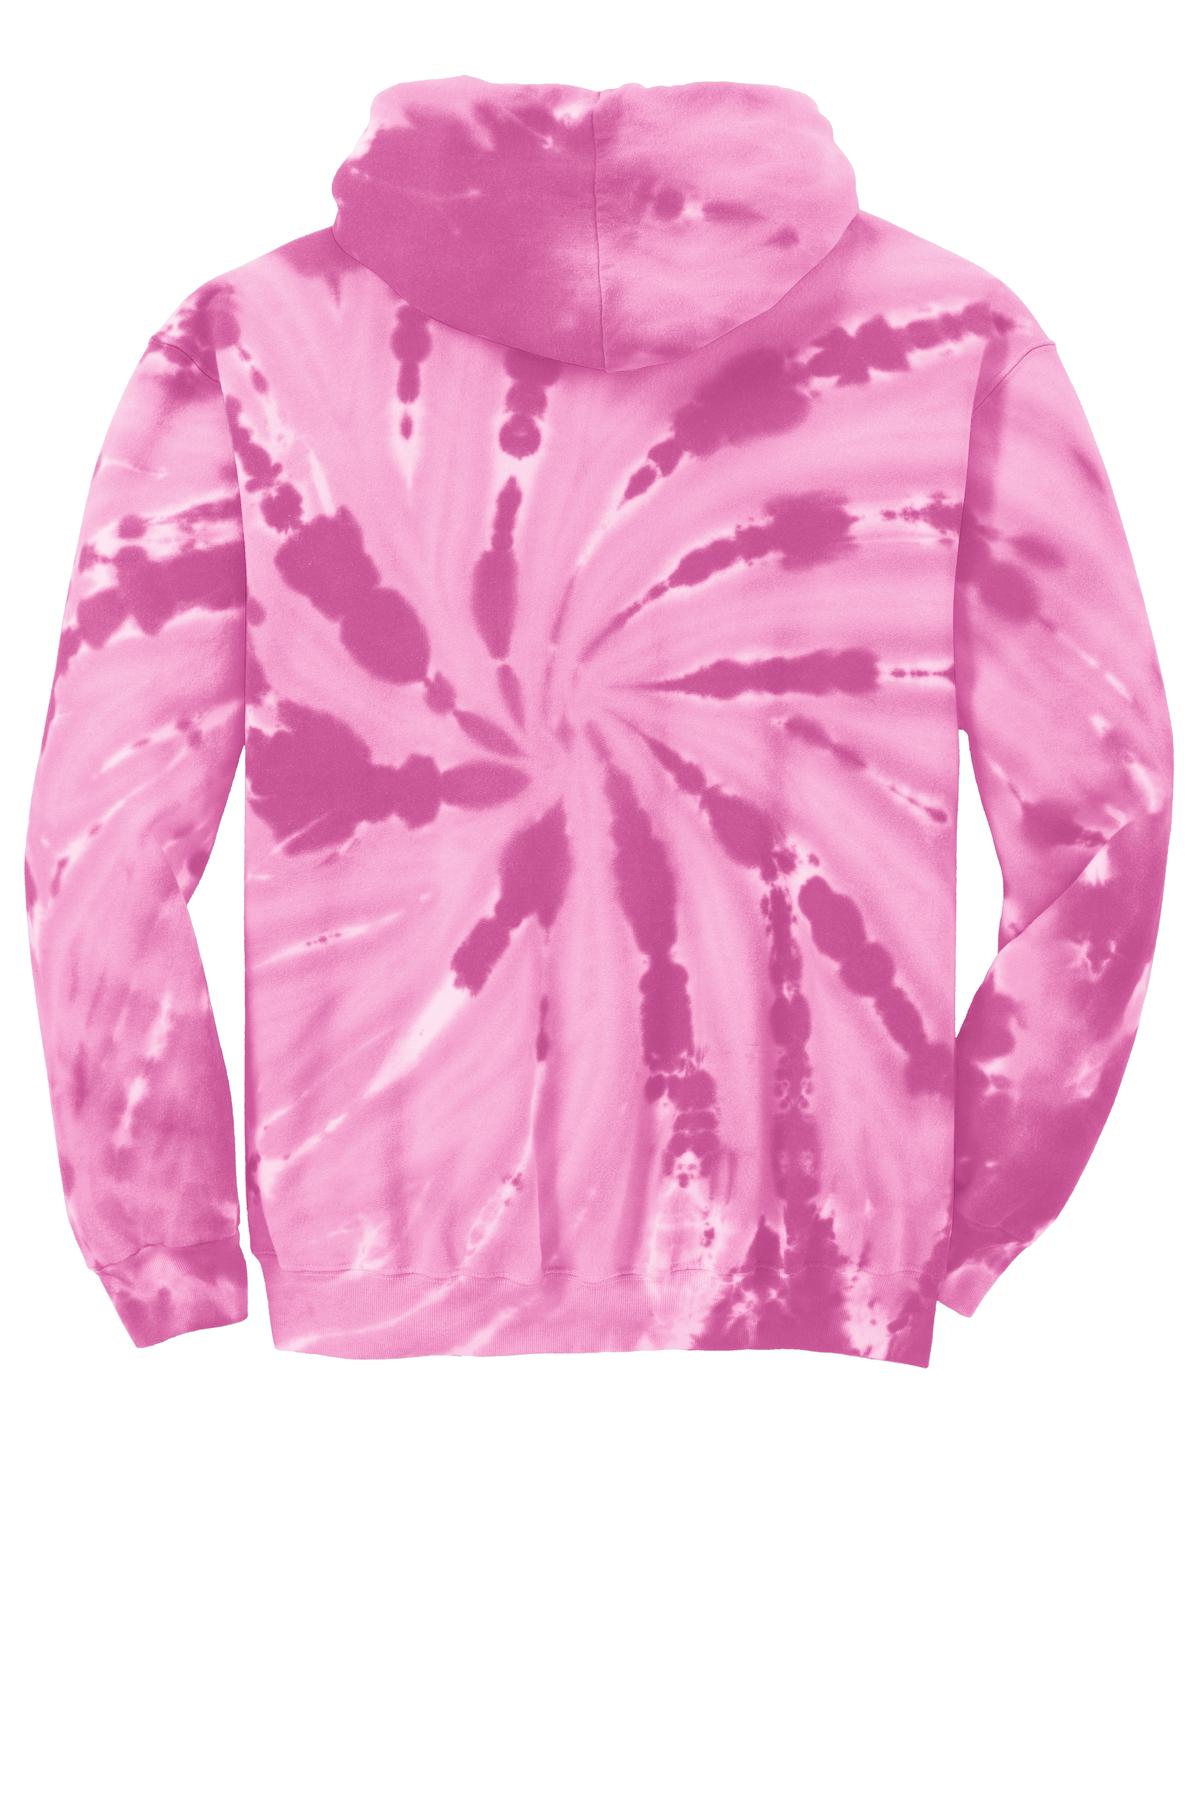 Port & Company Youth Tie-Dye Pullover Hooded Sweatshirt. PC146Y - Pink